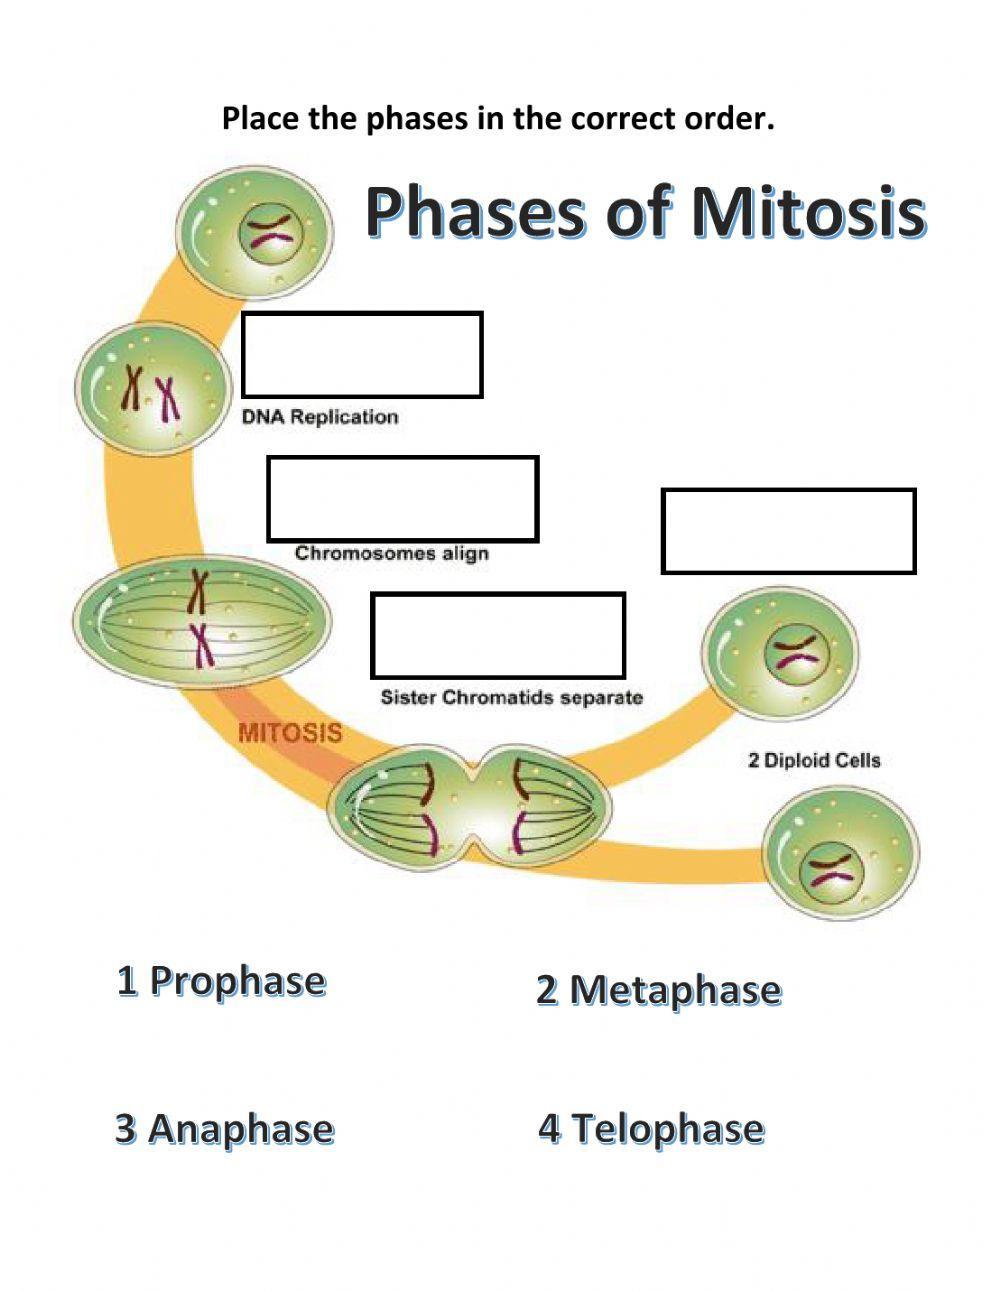 Mitosis phases